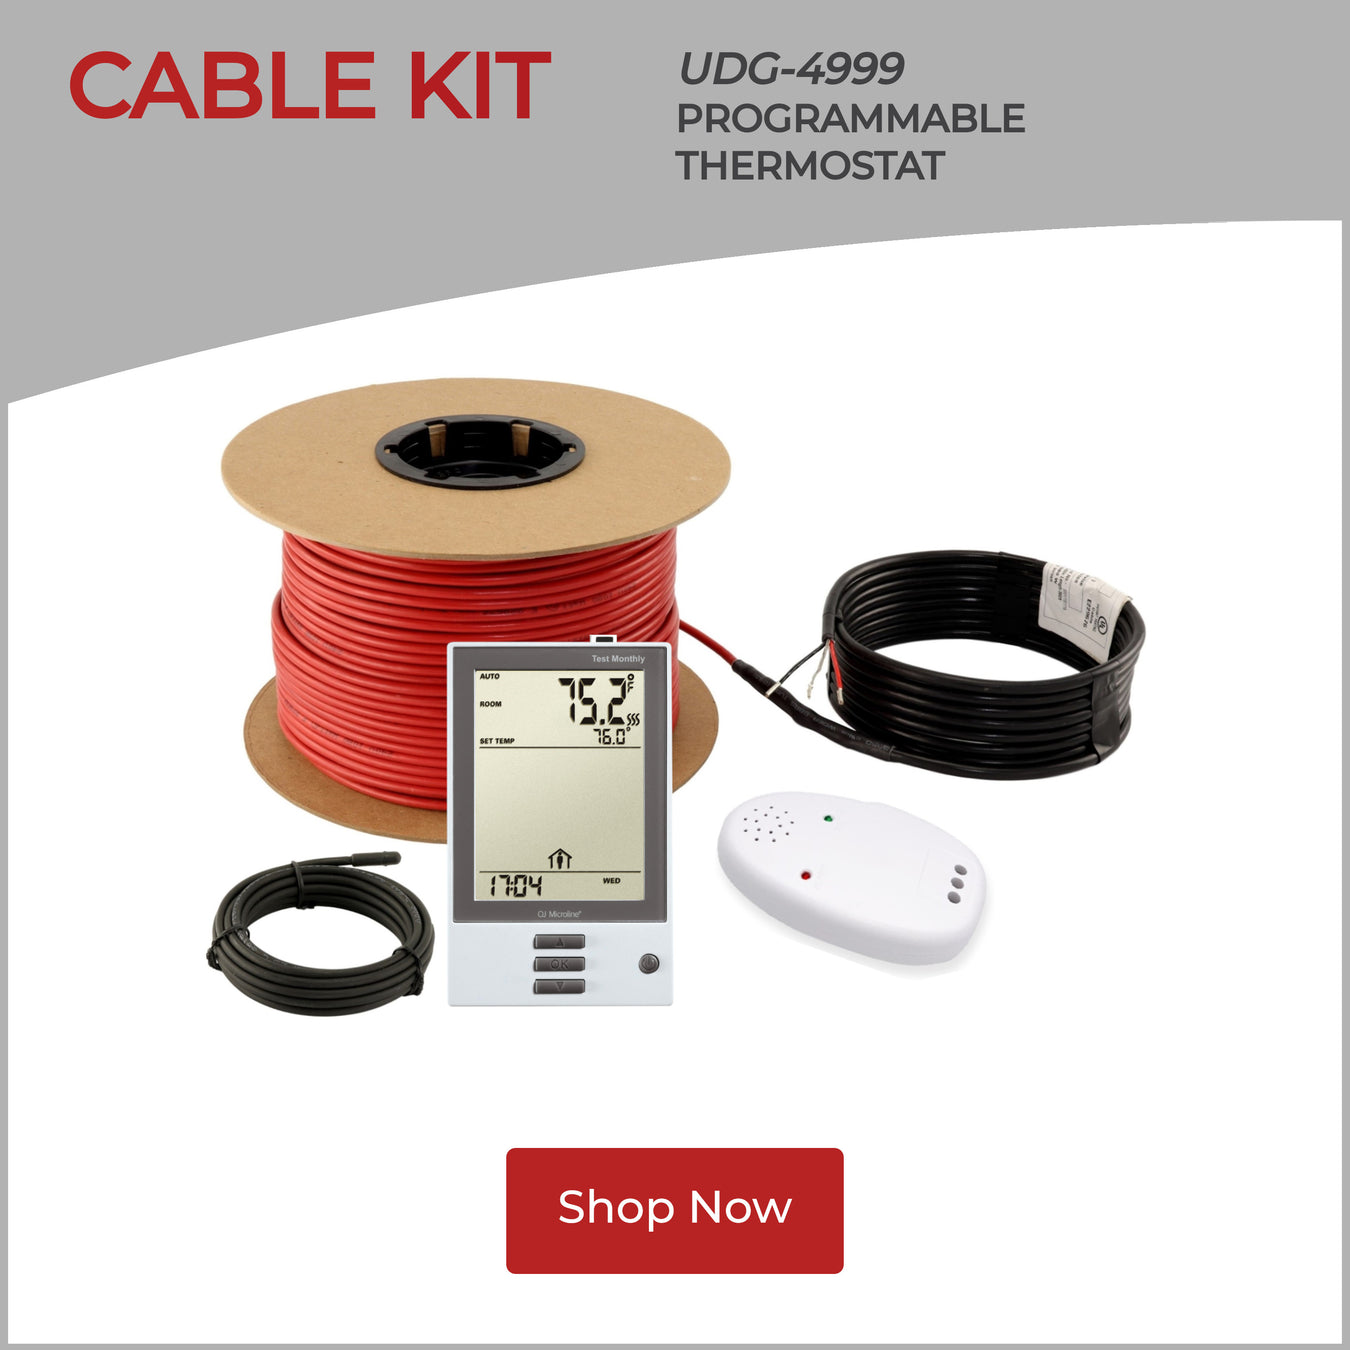 Overview_-_Cable_Kit_with_UDG